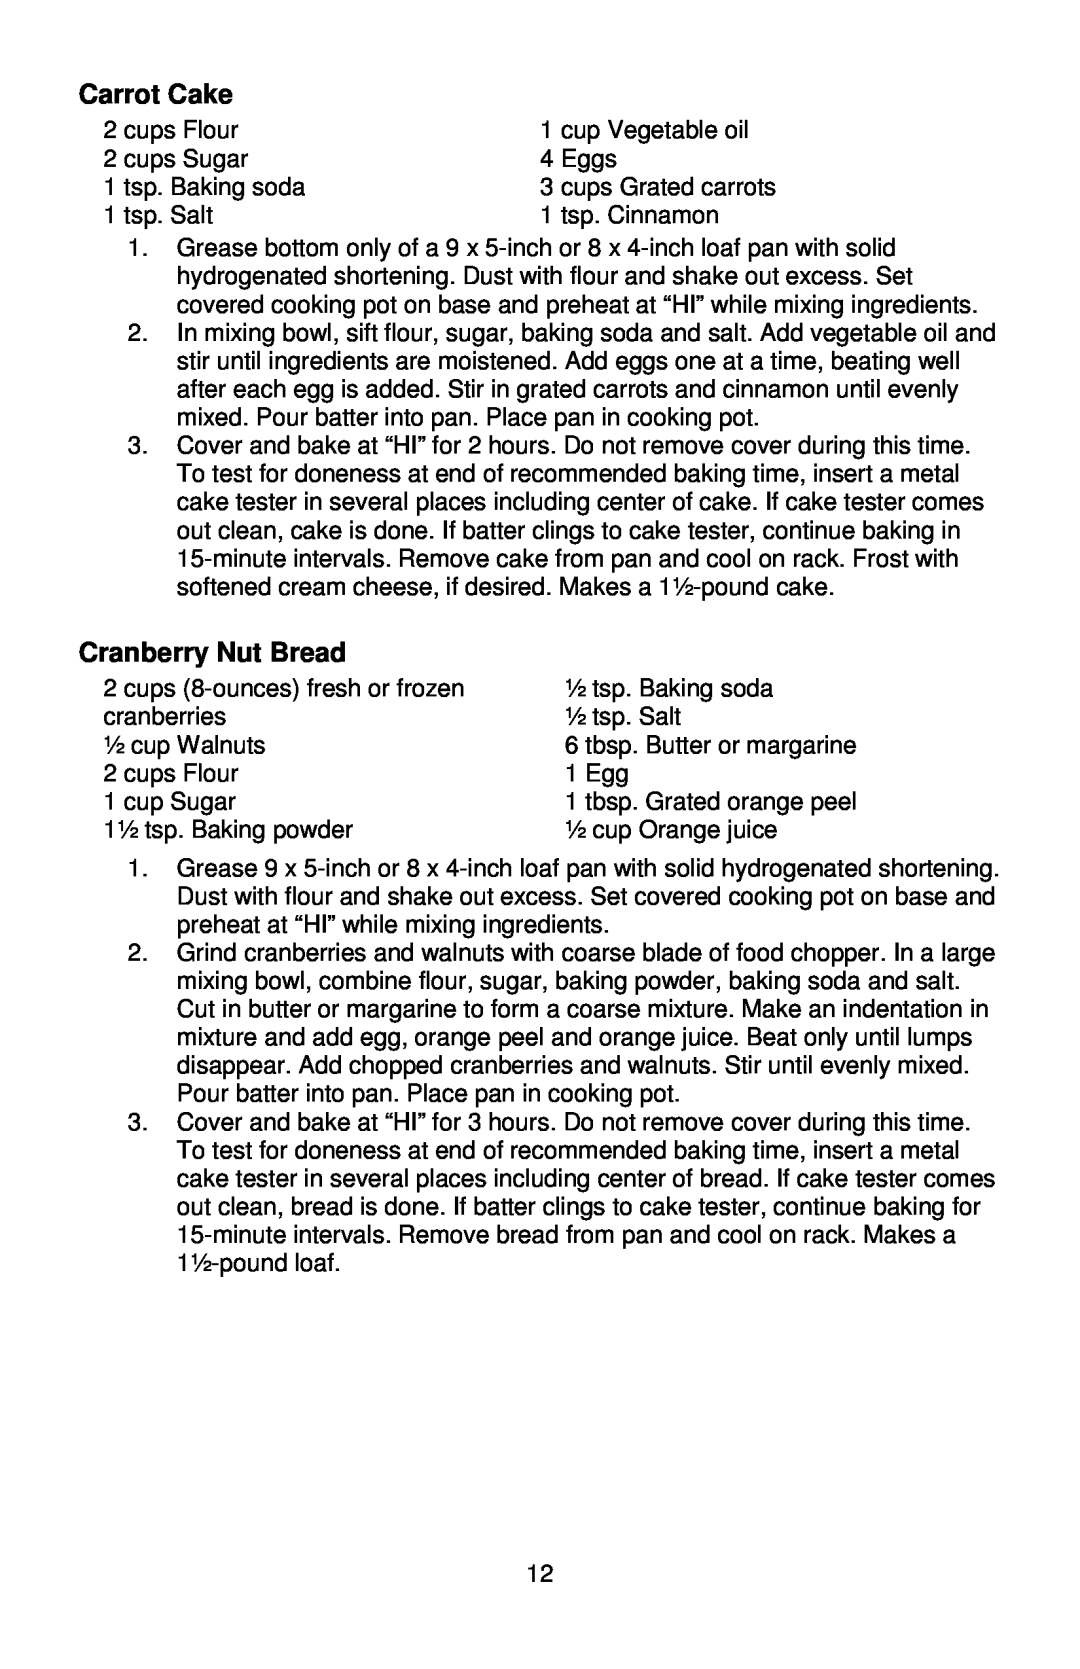 West Bend 84966, L5800 instruction manual Carrot Cake, Cranberry Nut Bread 